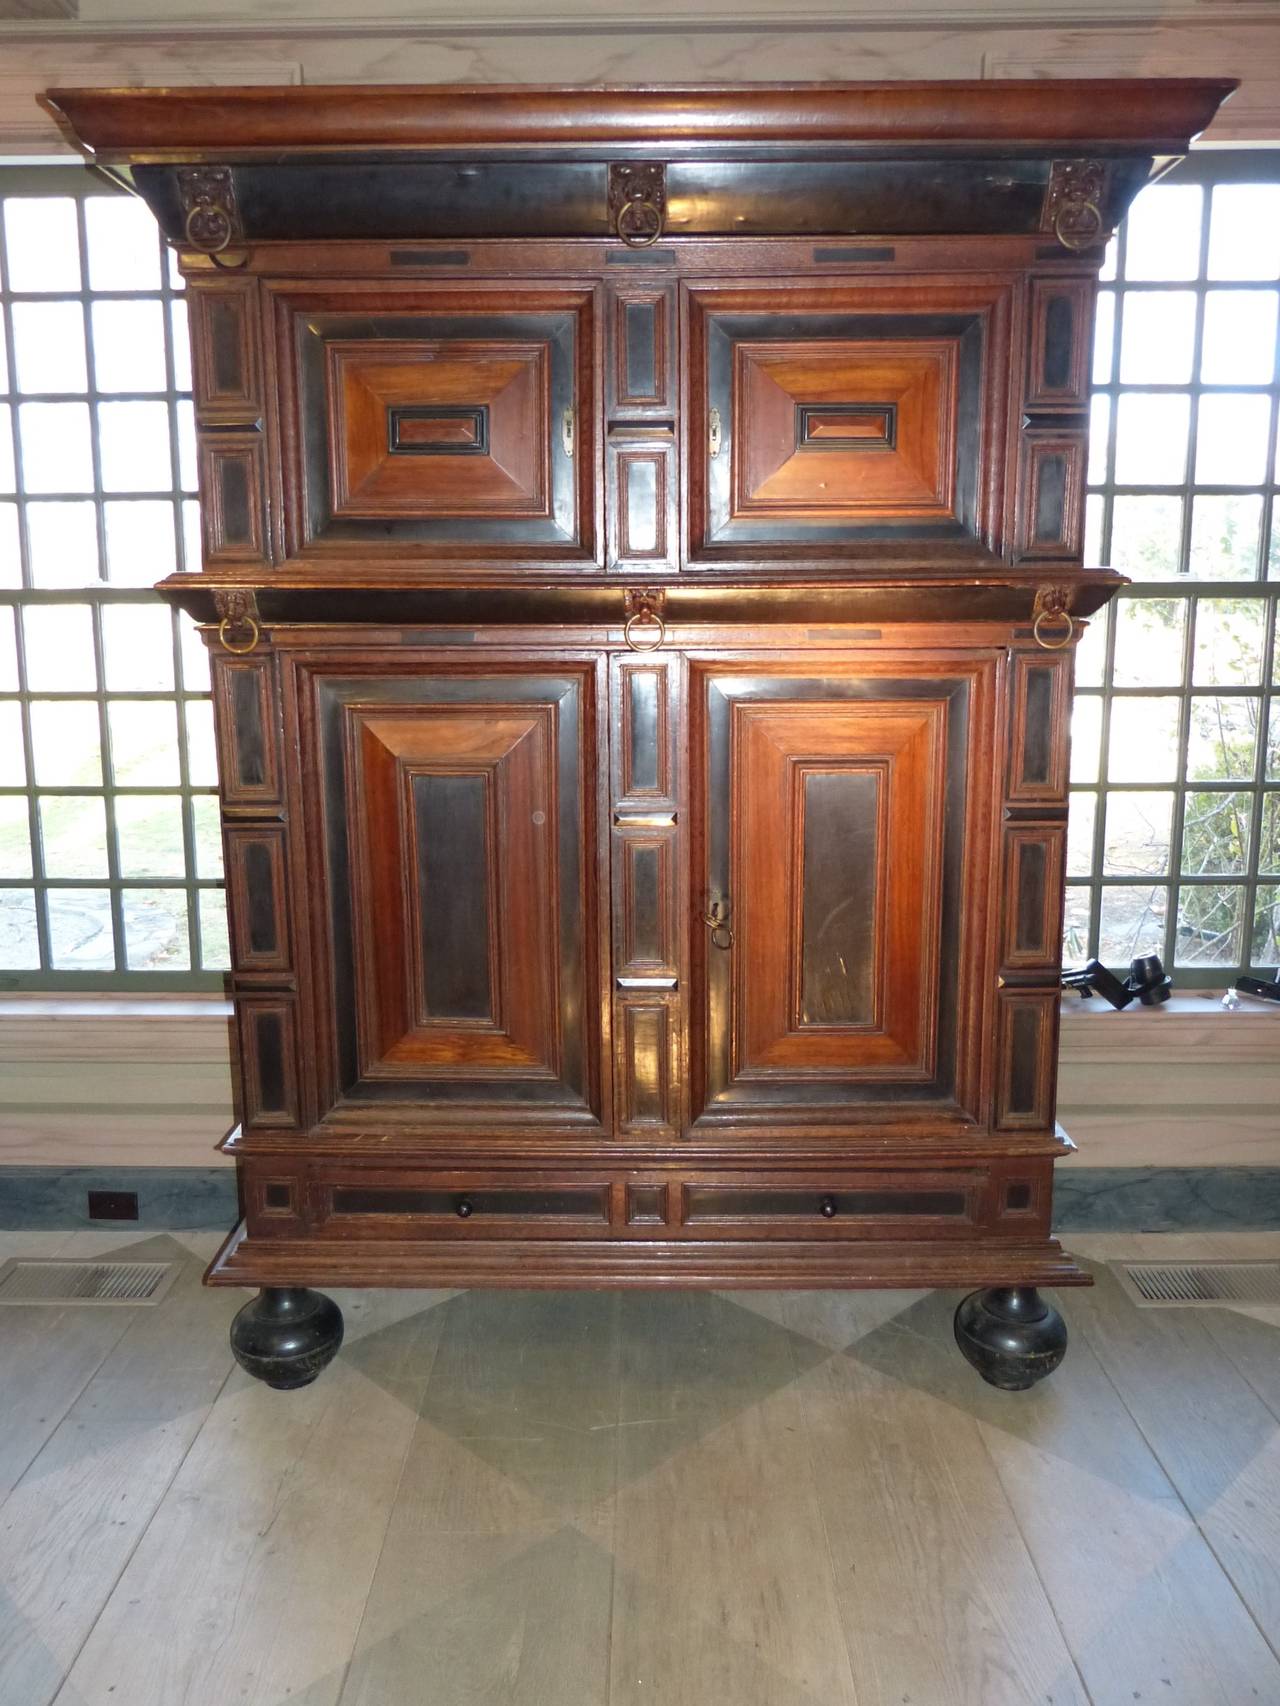 A large and imposing late 17th century Dutch oak kast or cupboard with ebony and rosewood highlights on bun feet, circa 1670.